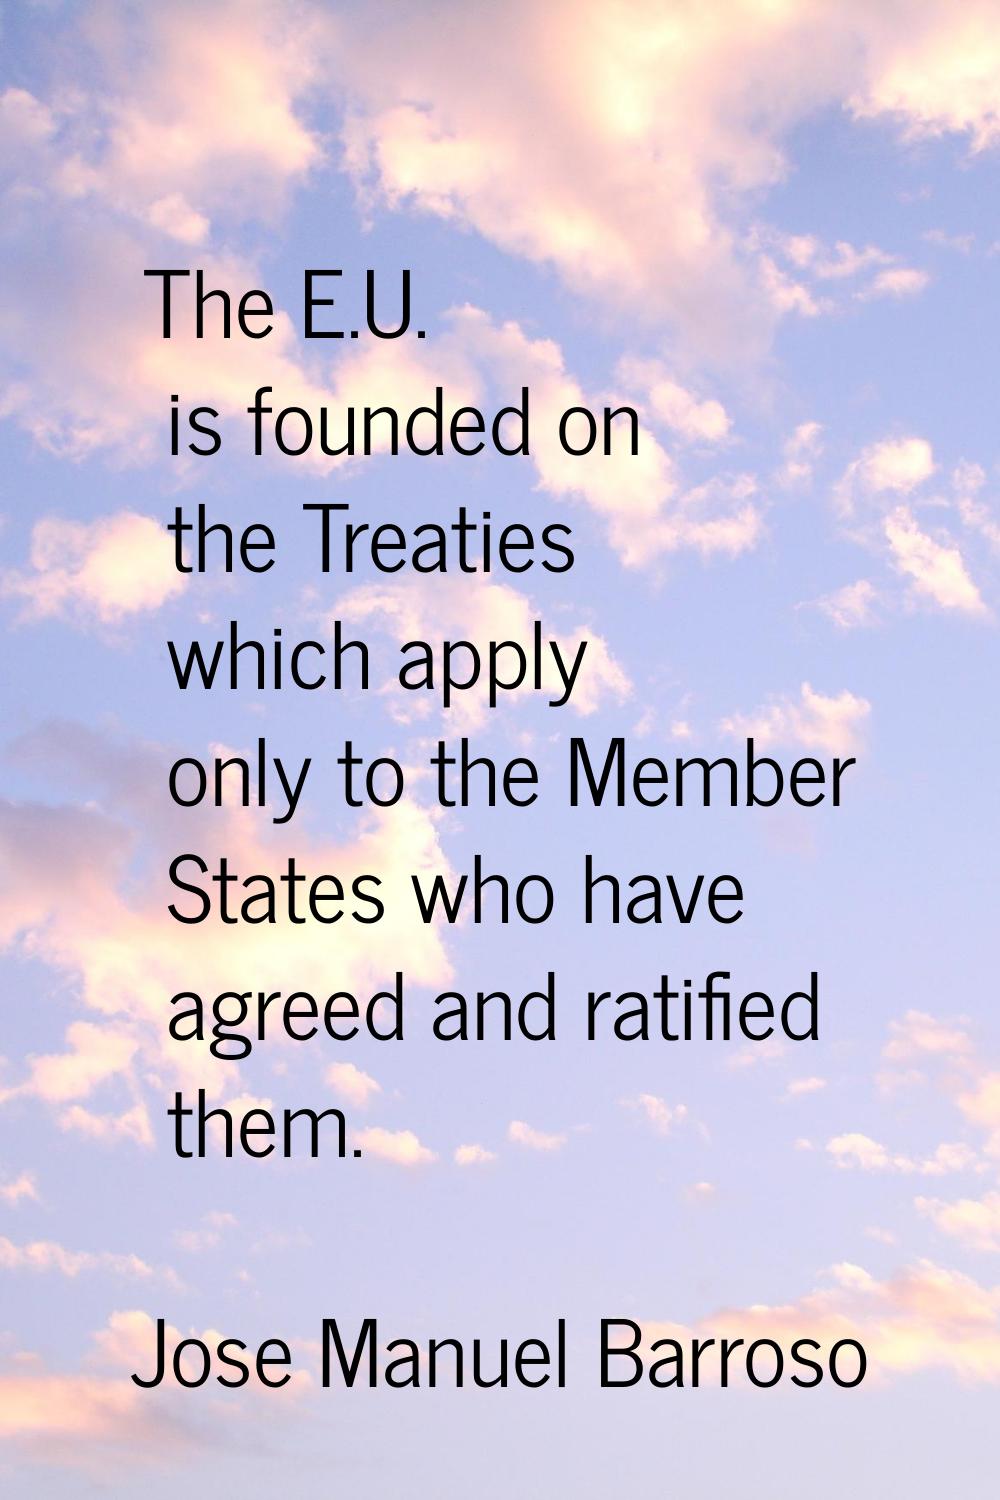 The E.U. is founded on the Treaties which apply only to the Member States who have agreed and ratif